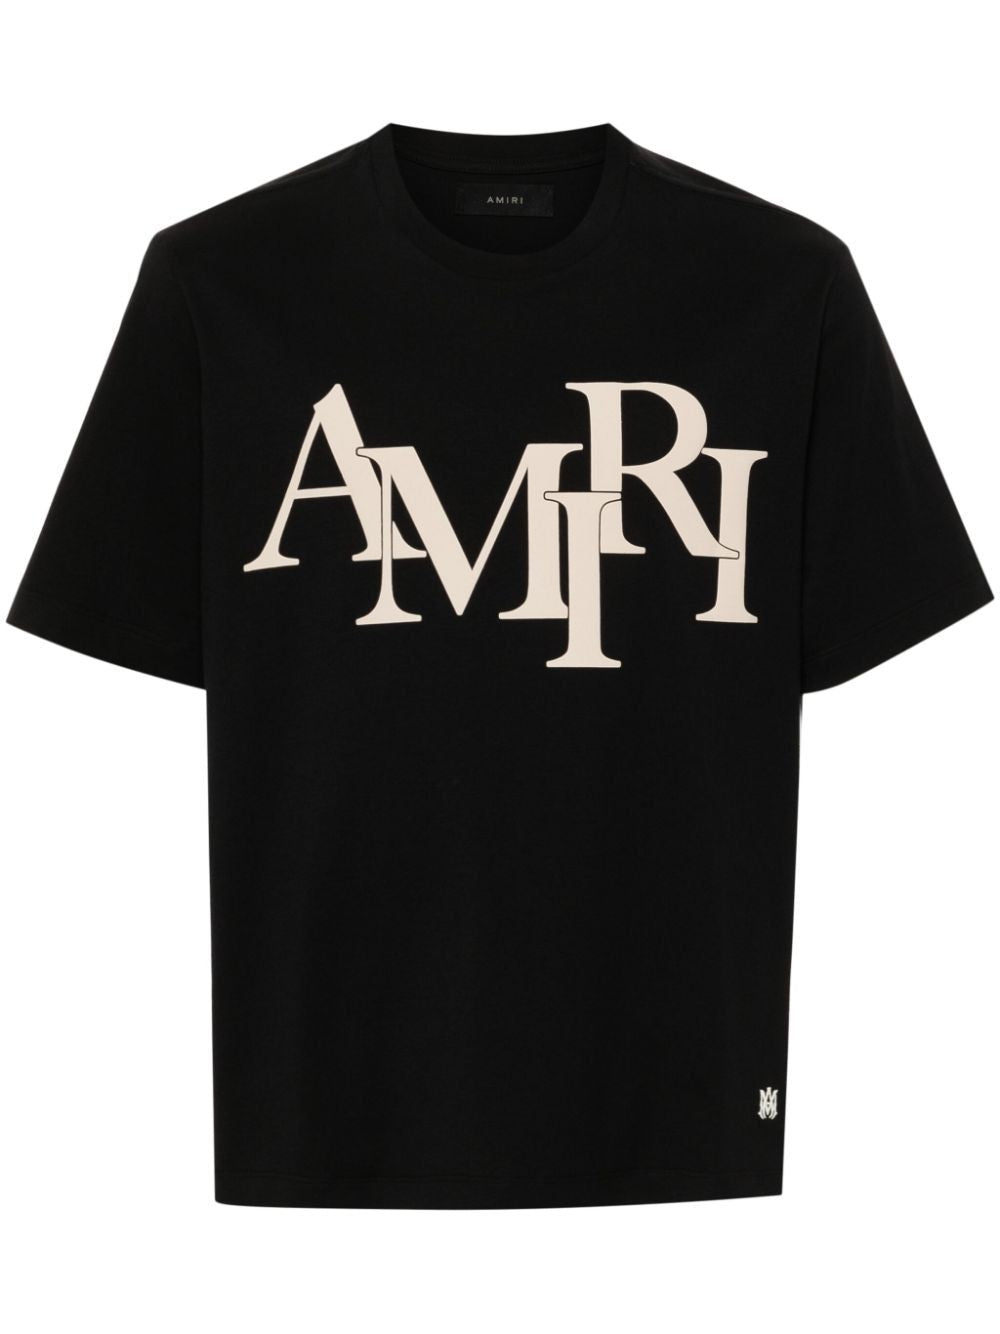 AMIRI Staggered Black Tee for Men - Limited Edition